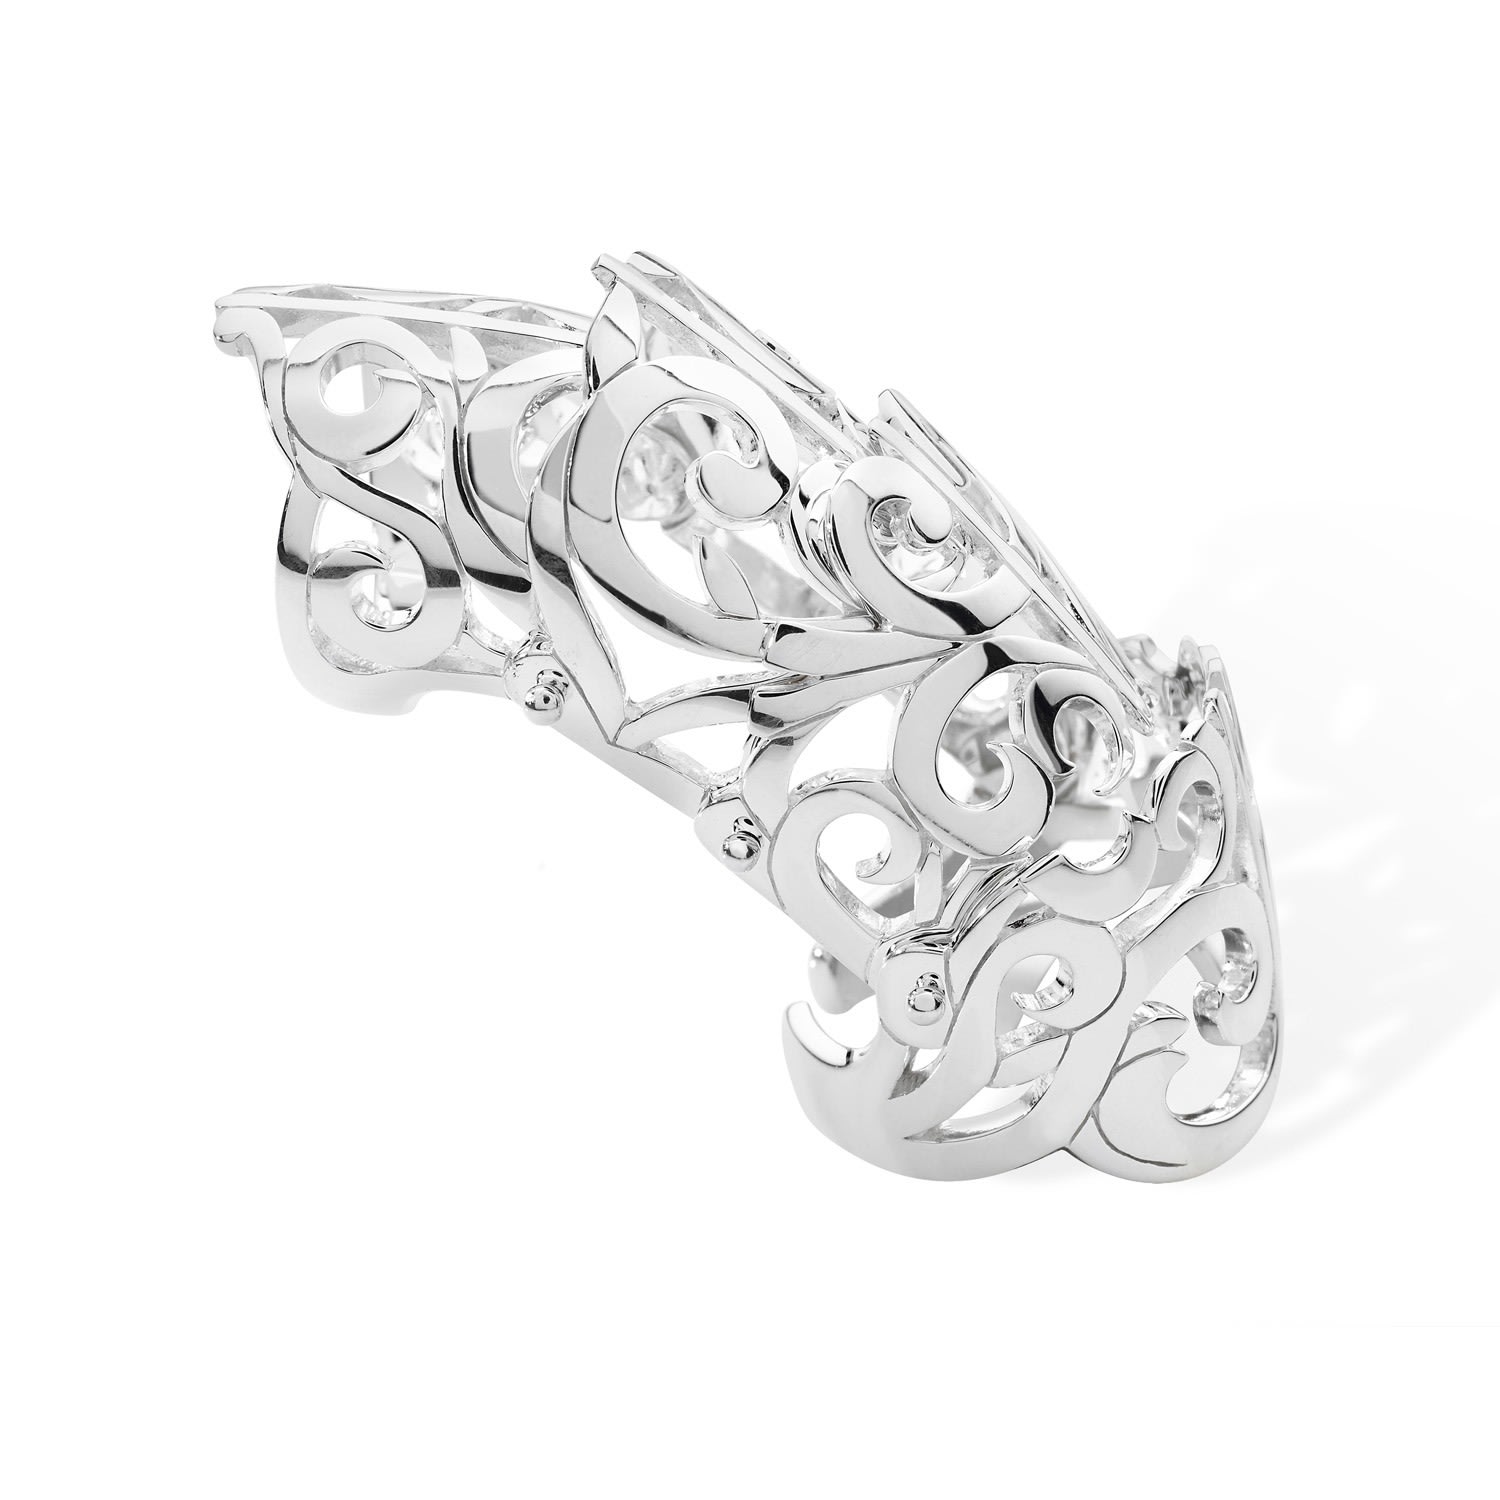 Shop Lucy Quartermaine Women's Silver Elements Full Armour Ring